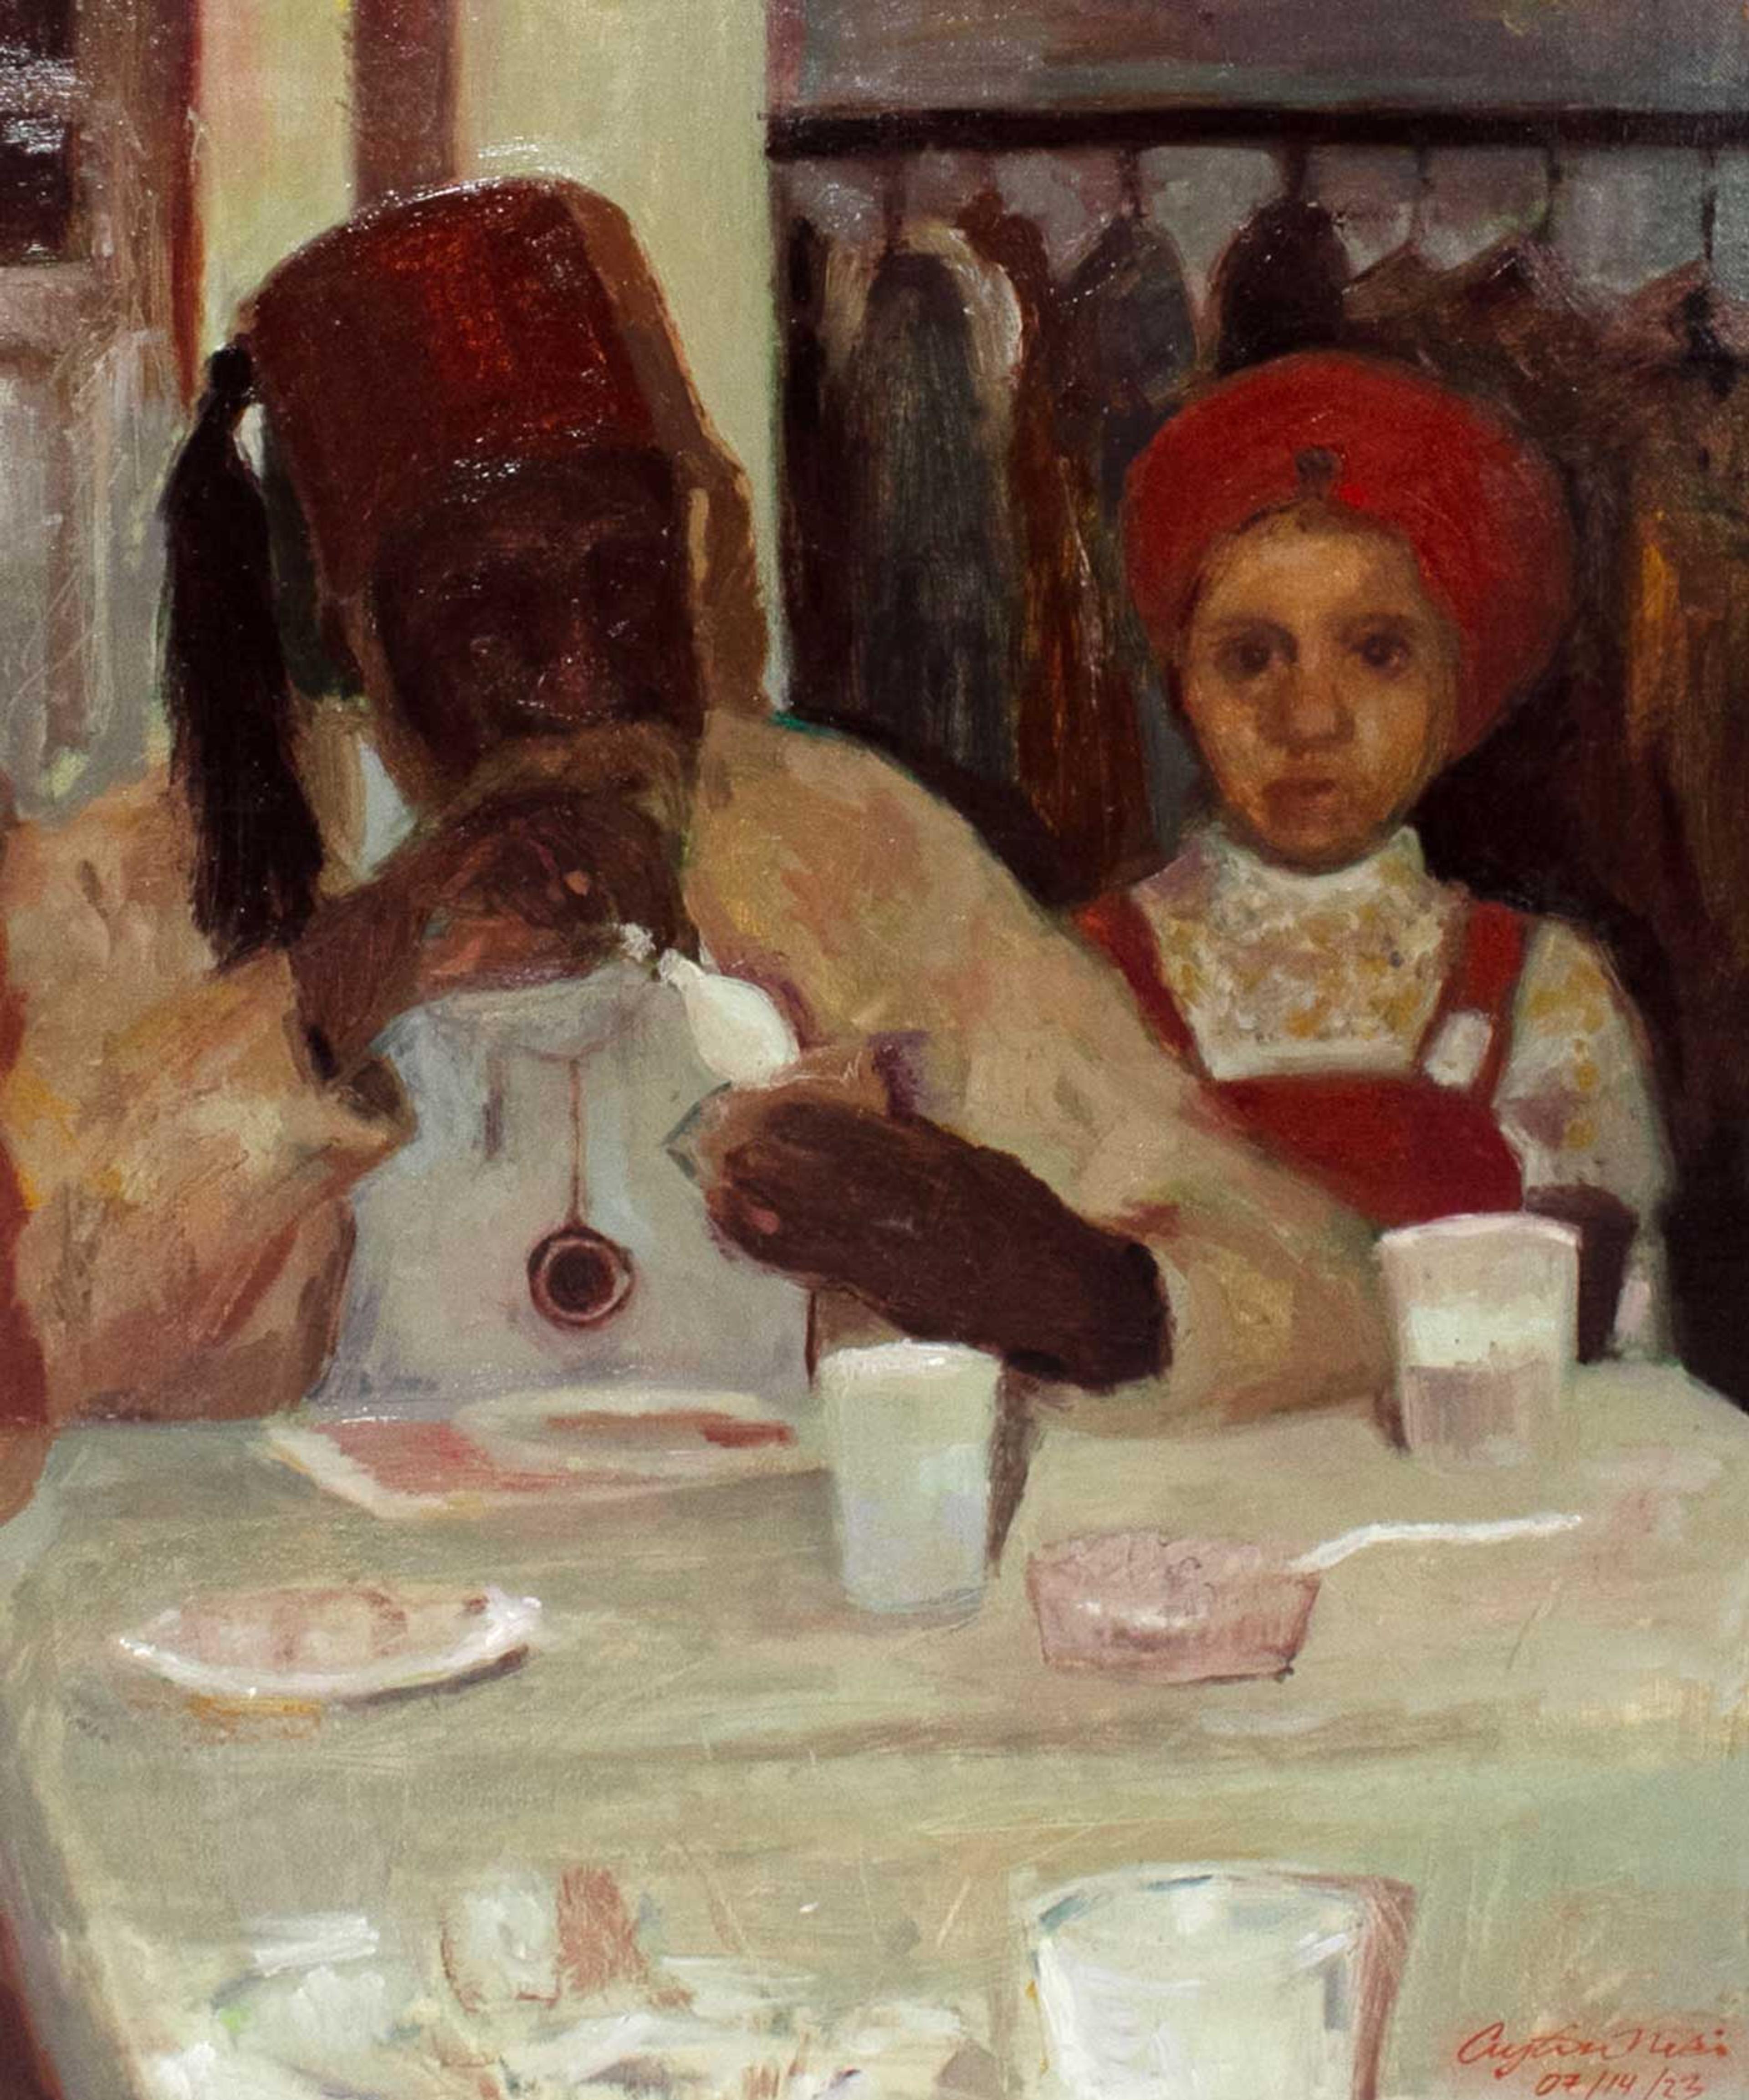 Oil painting of a adult man wearing a red fez with a black tassel, seated at left behind a white table cloth. A young child stands behind him to the right, wearing a red turban and red overalls over a white shirt. The man wears a tan robe and is eating food with a white spoon from a container held in his left hand. A few drinking glasses and small plates sit on the table. An open closet behind the child is lined with coats hanging from a rack. 